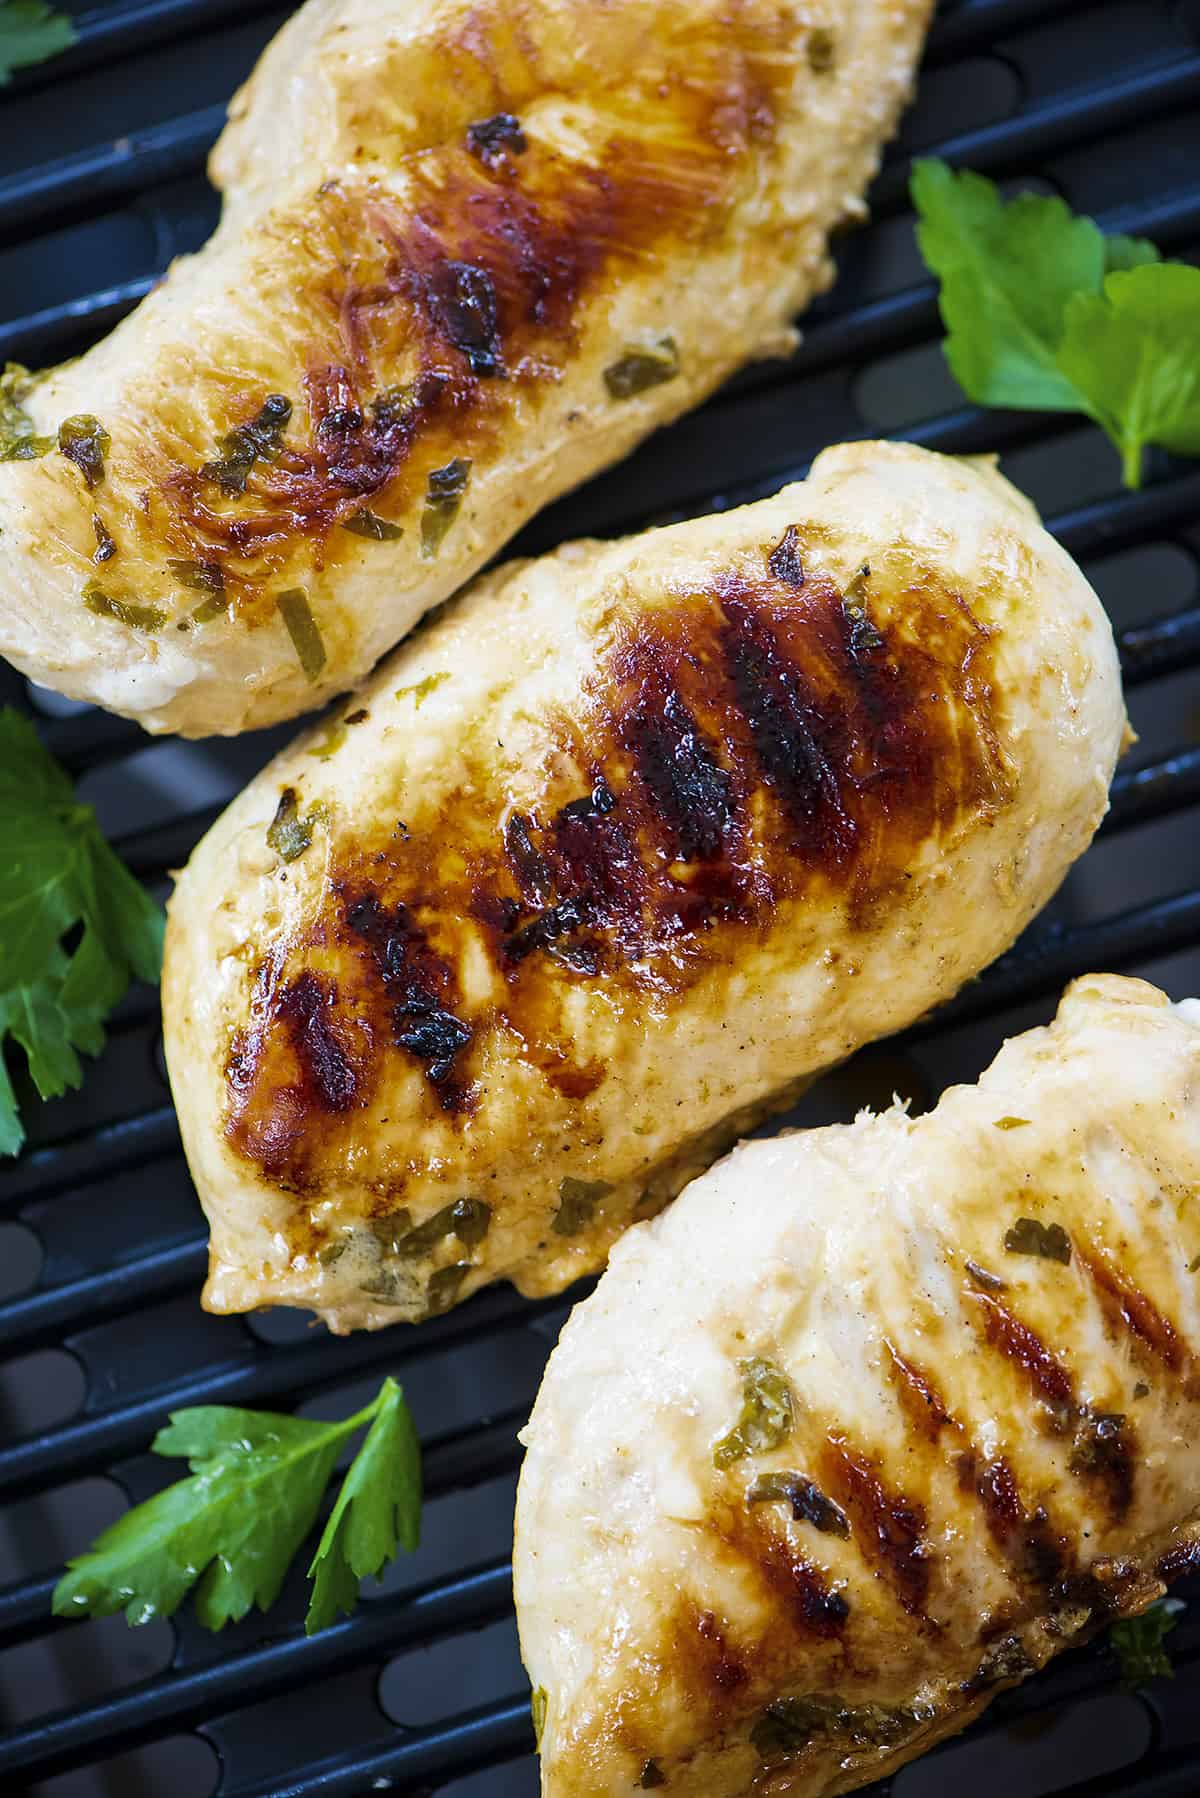 Grilled chicken on grill.